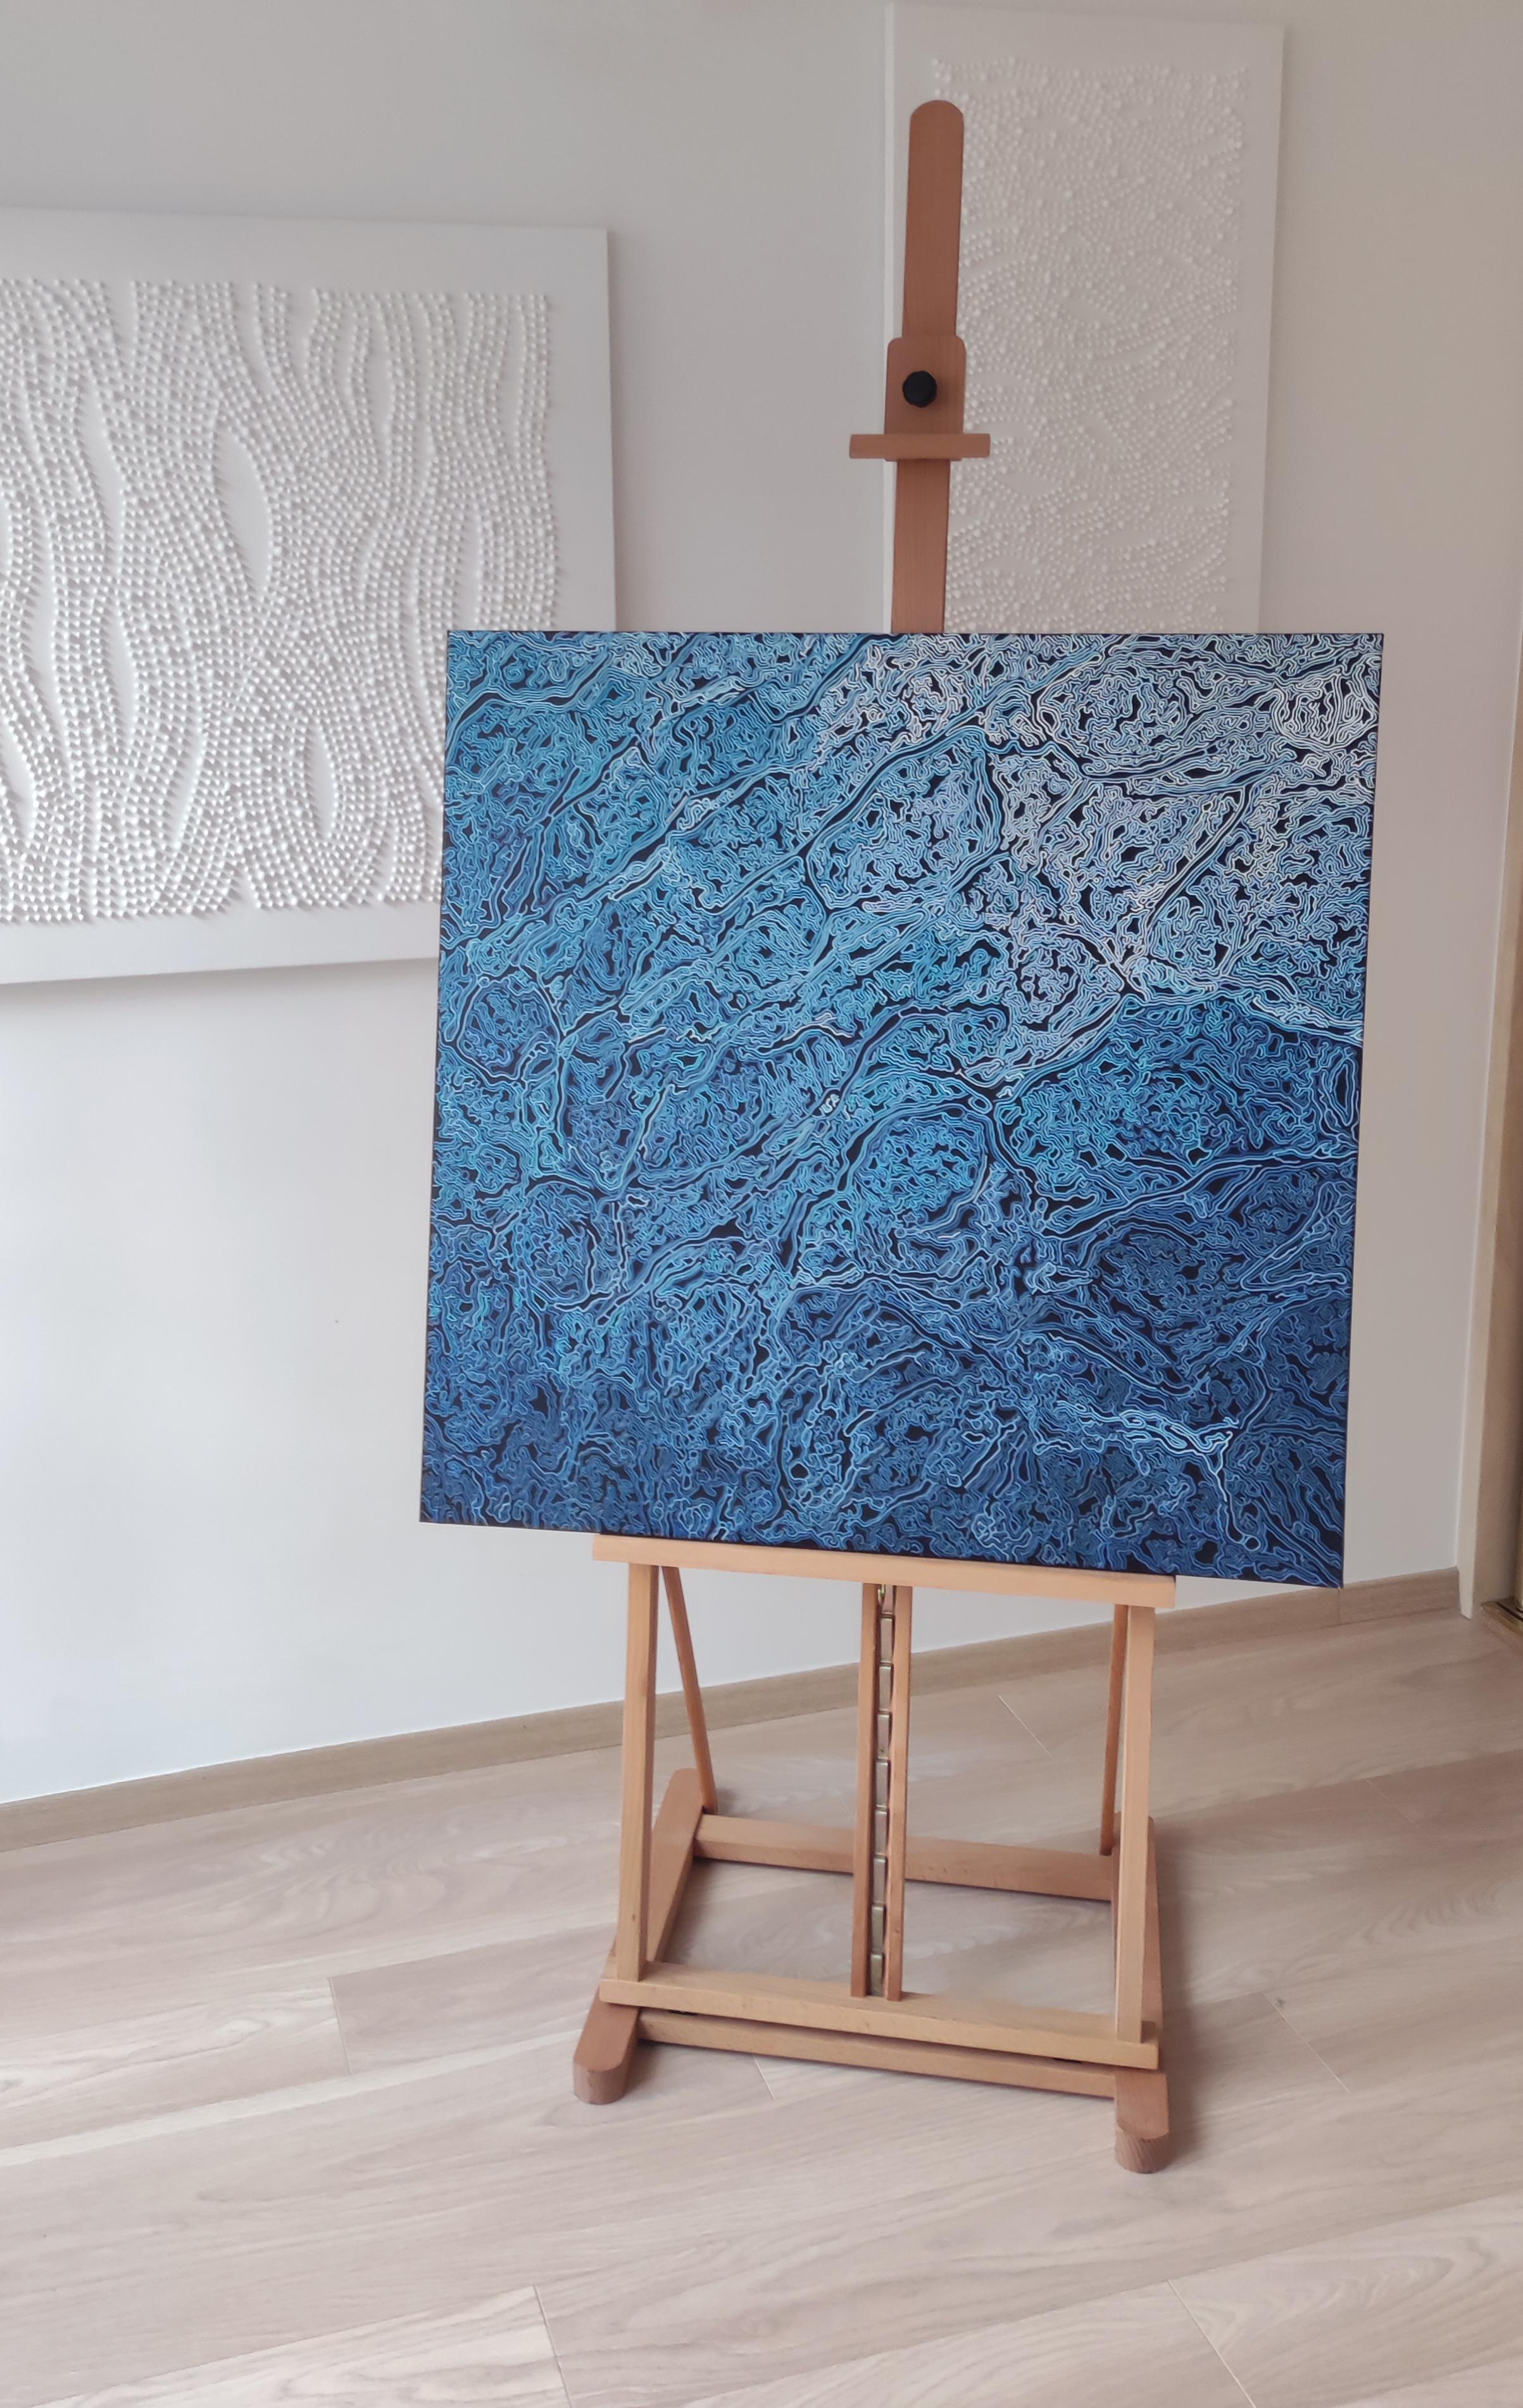 French Contemporary Art by Diana Torje - In Blue 2